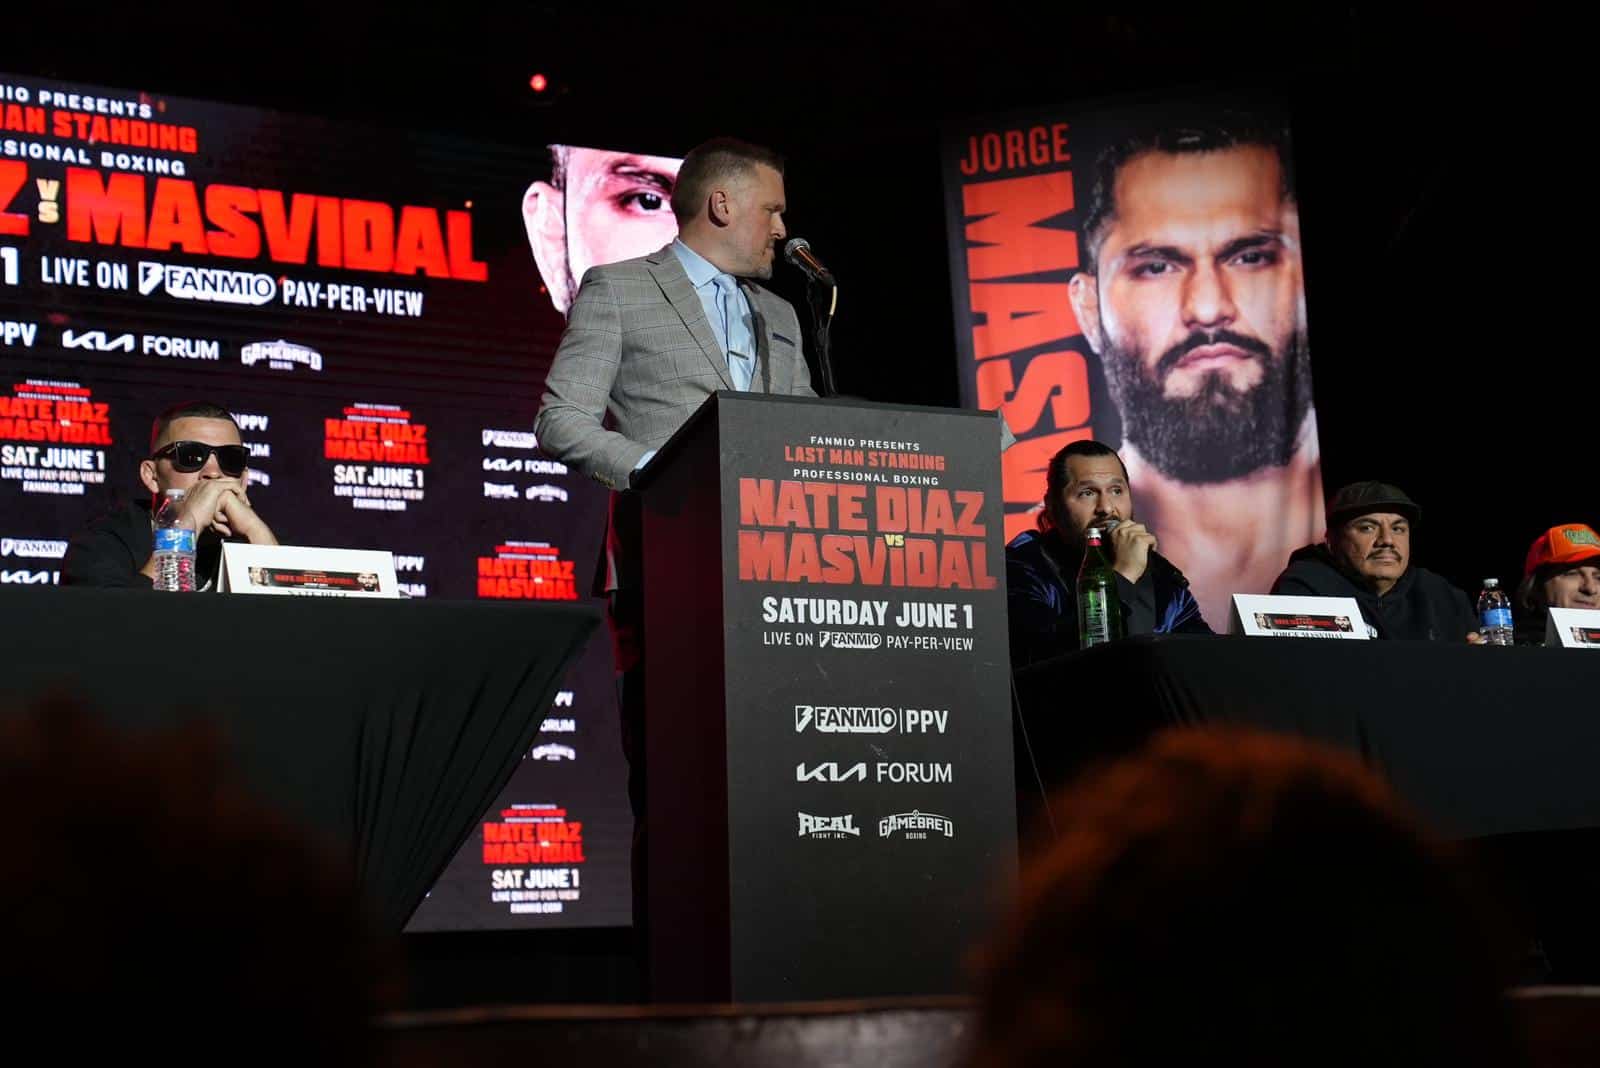 Nate Diaz And Jorge Masvidal Square Off In NYC Ahead Of June Boxing Match